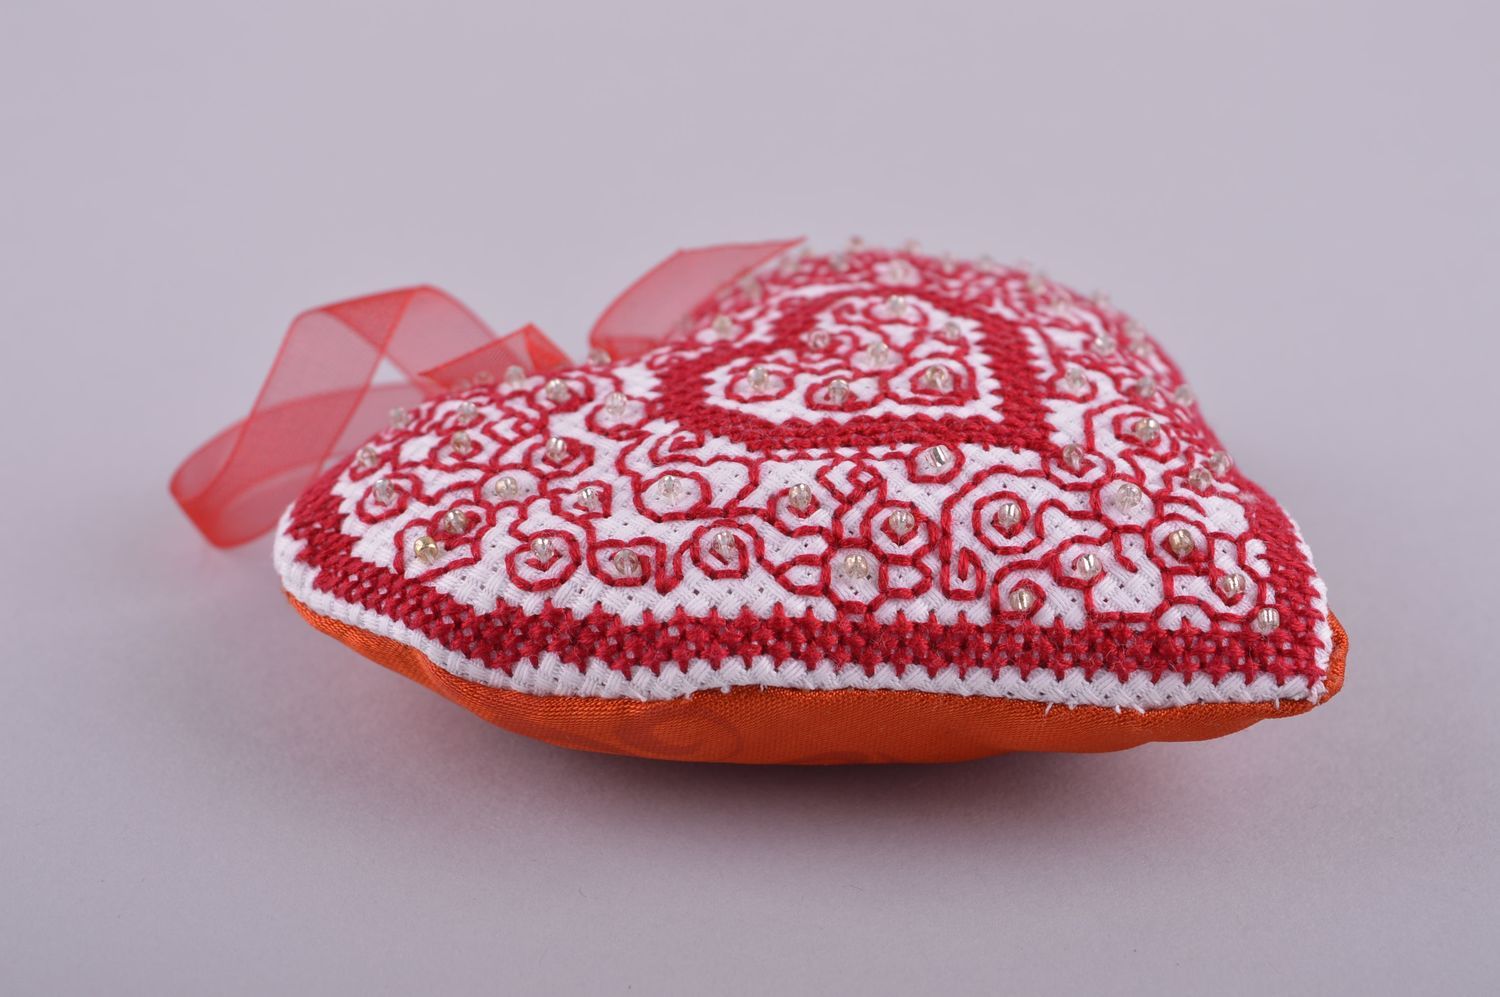 Homemade Christmas decor soft toy heart toy for decorative use Christmas gifts photo 4